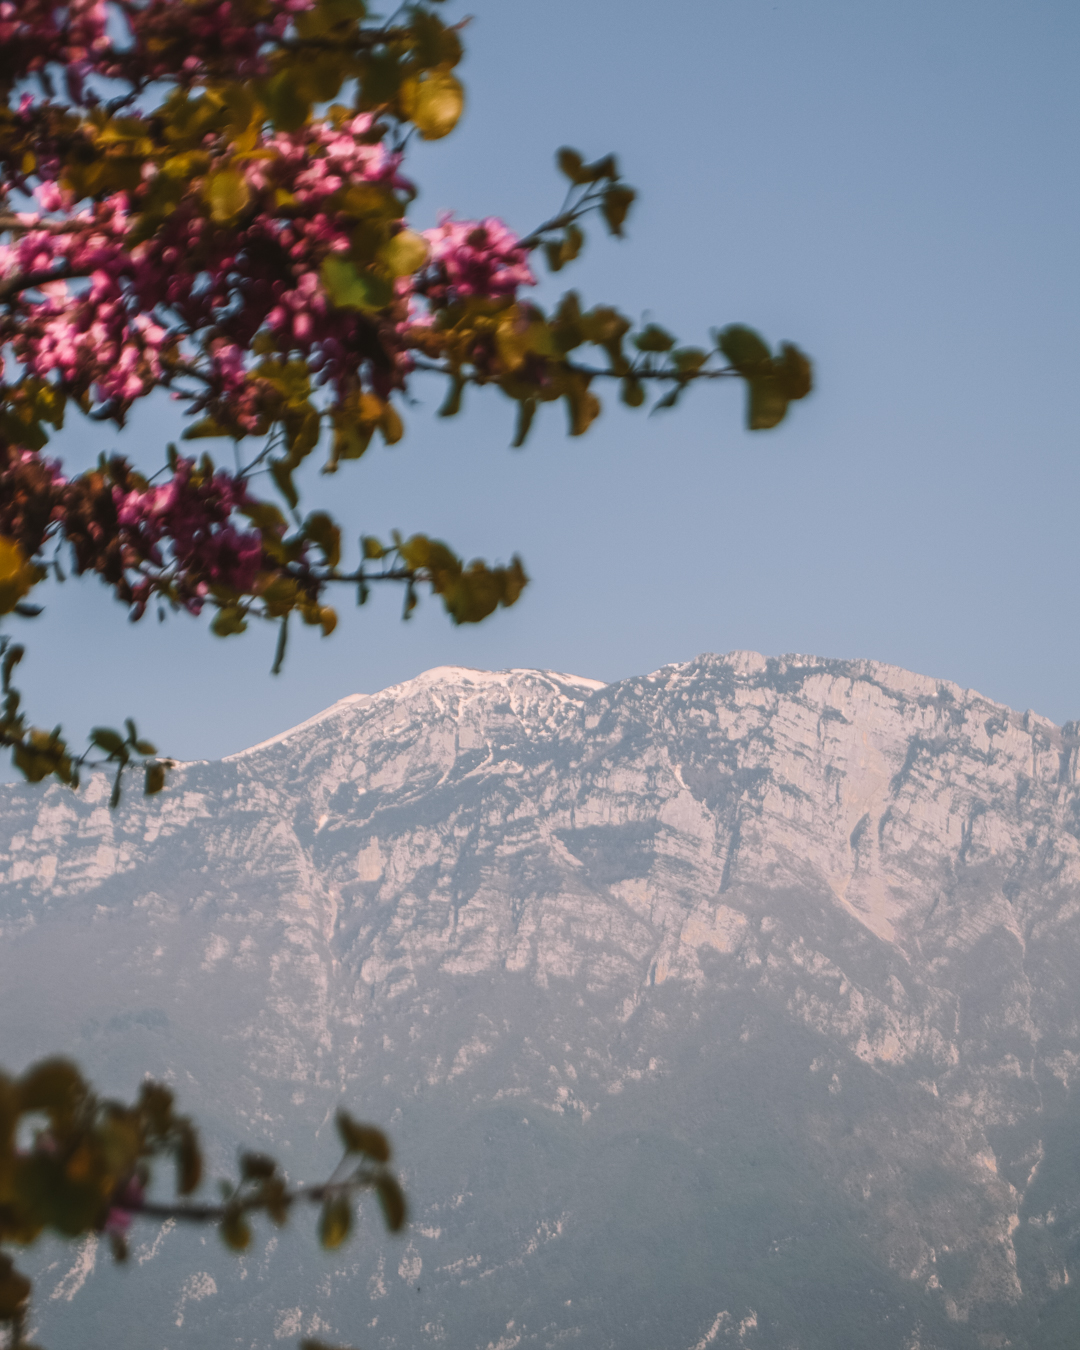 The Dolomiti mountain framed with pink flowers